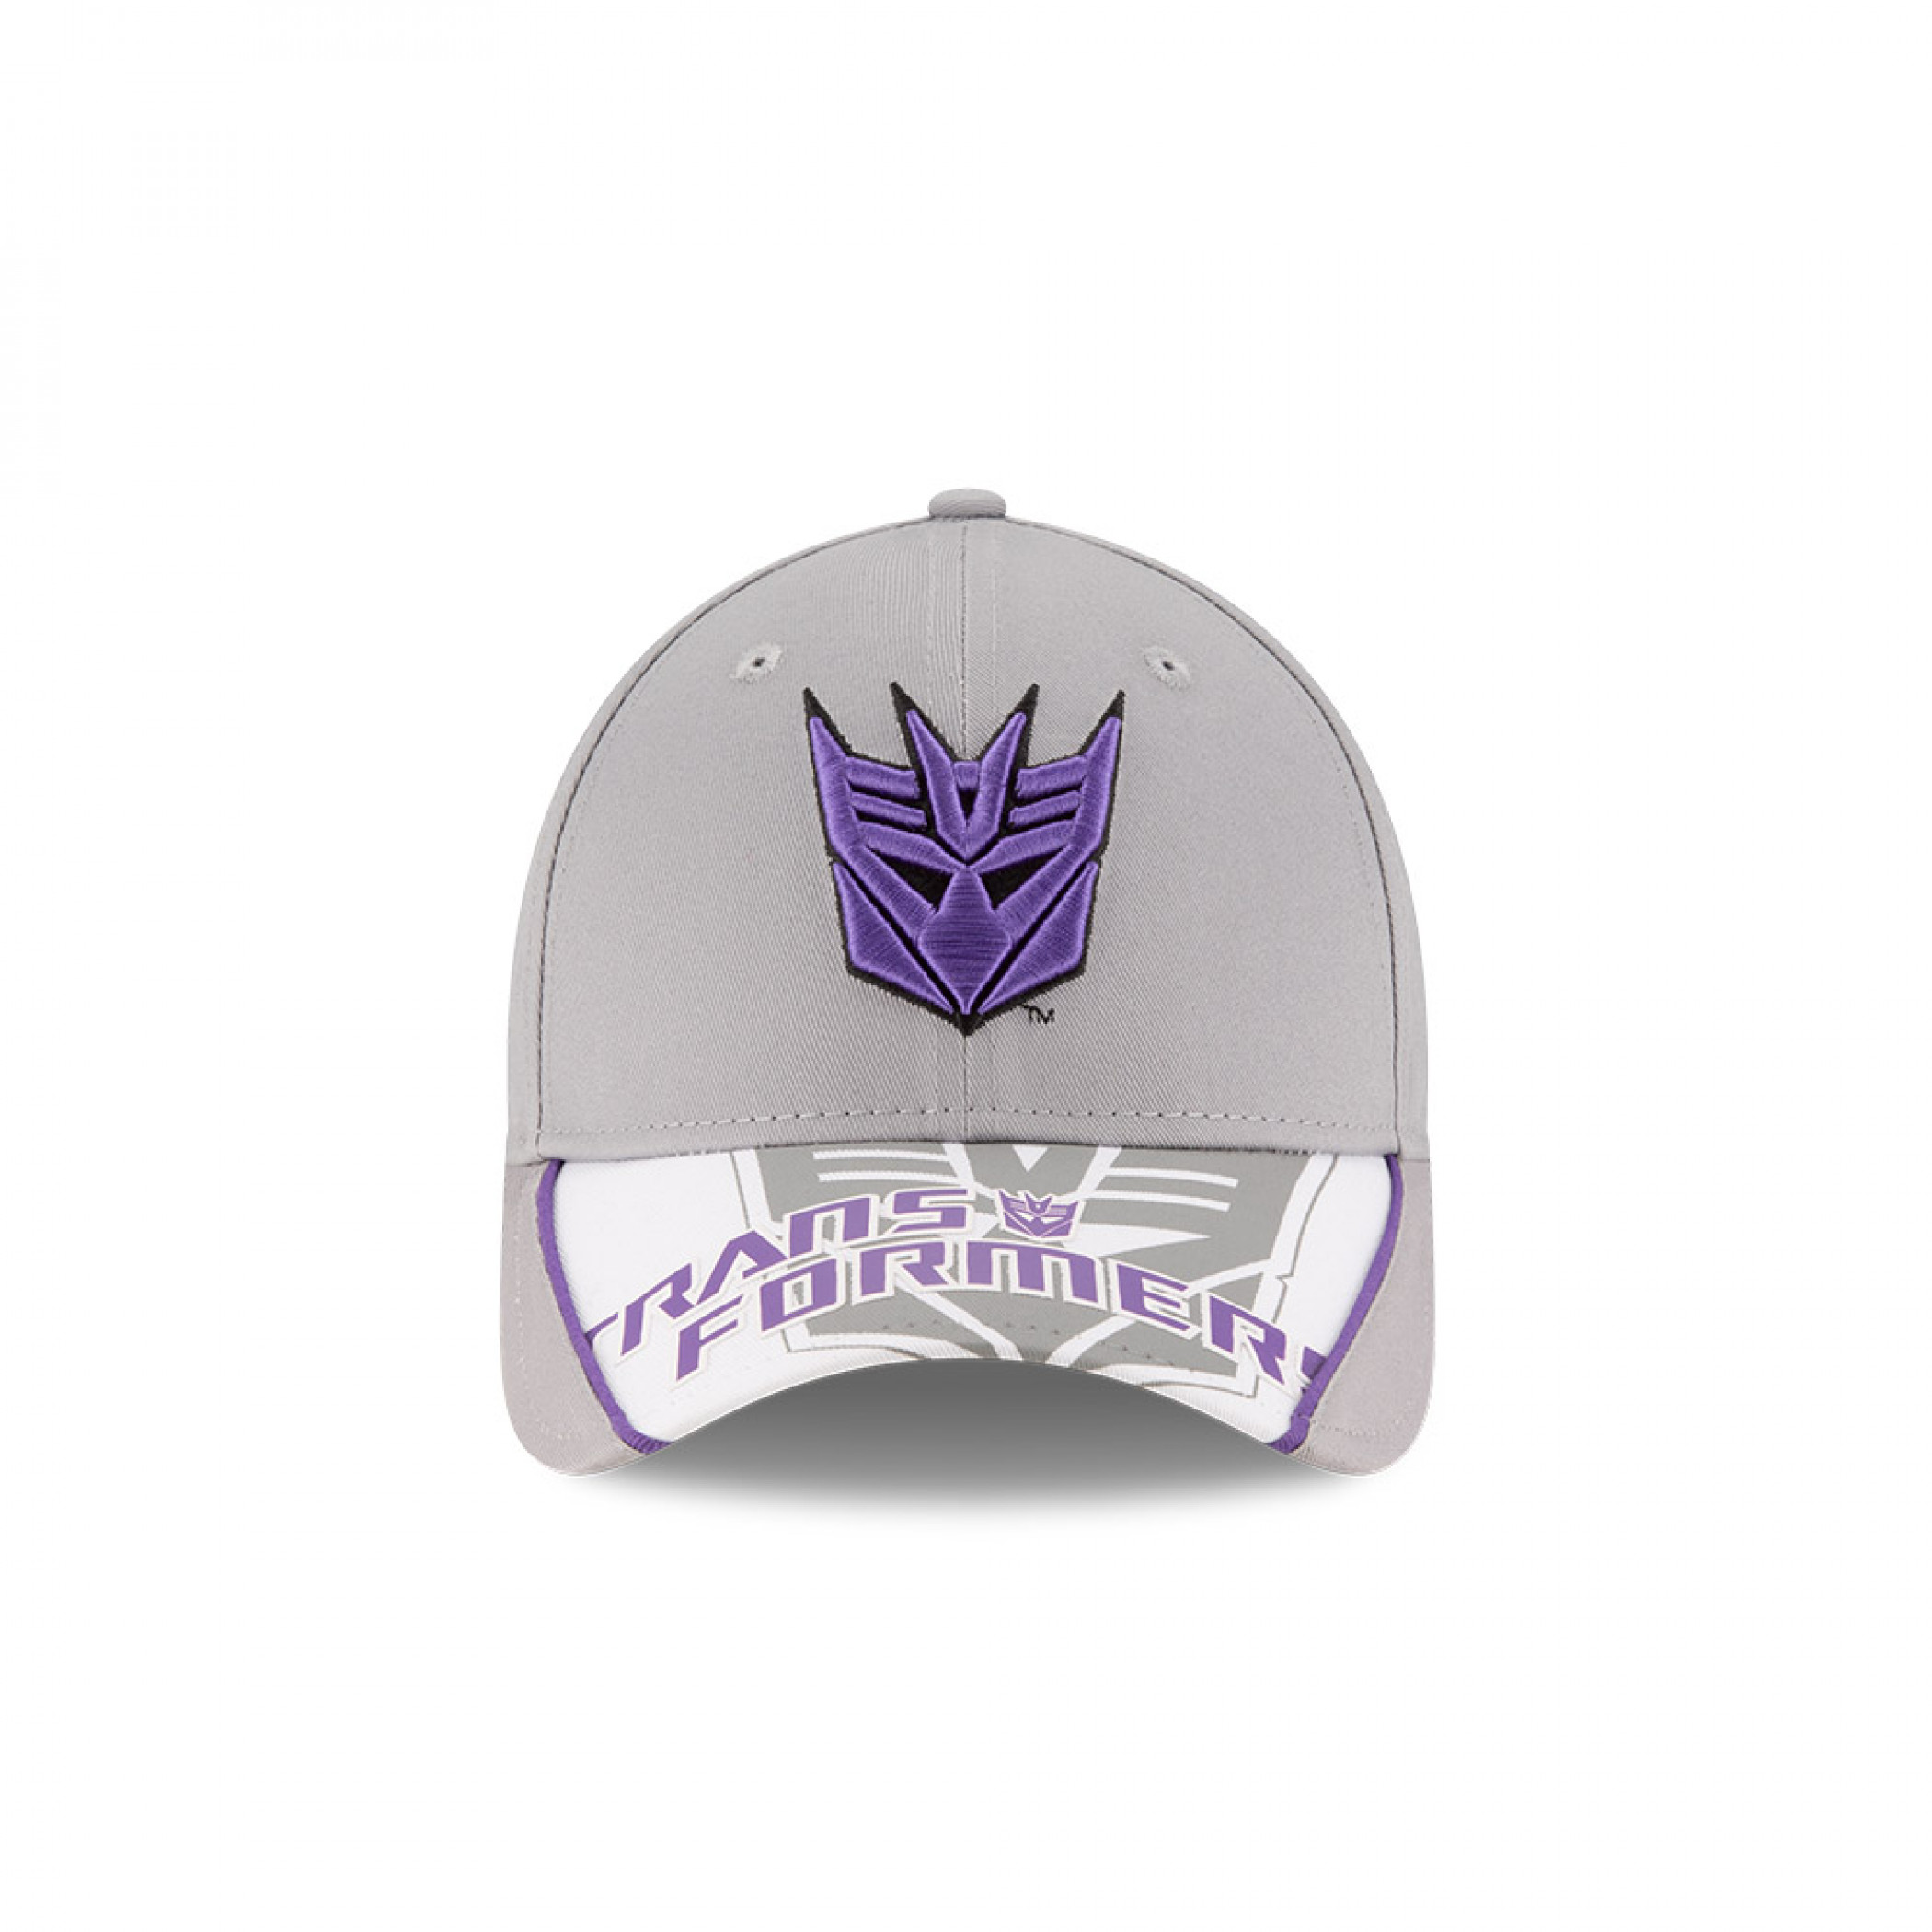 Transformers Text and Decepticons Logo New Era 9Forty Adjustable Hat